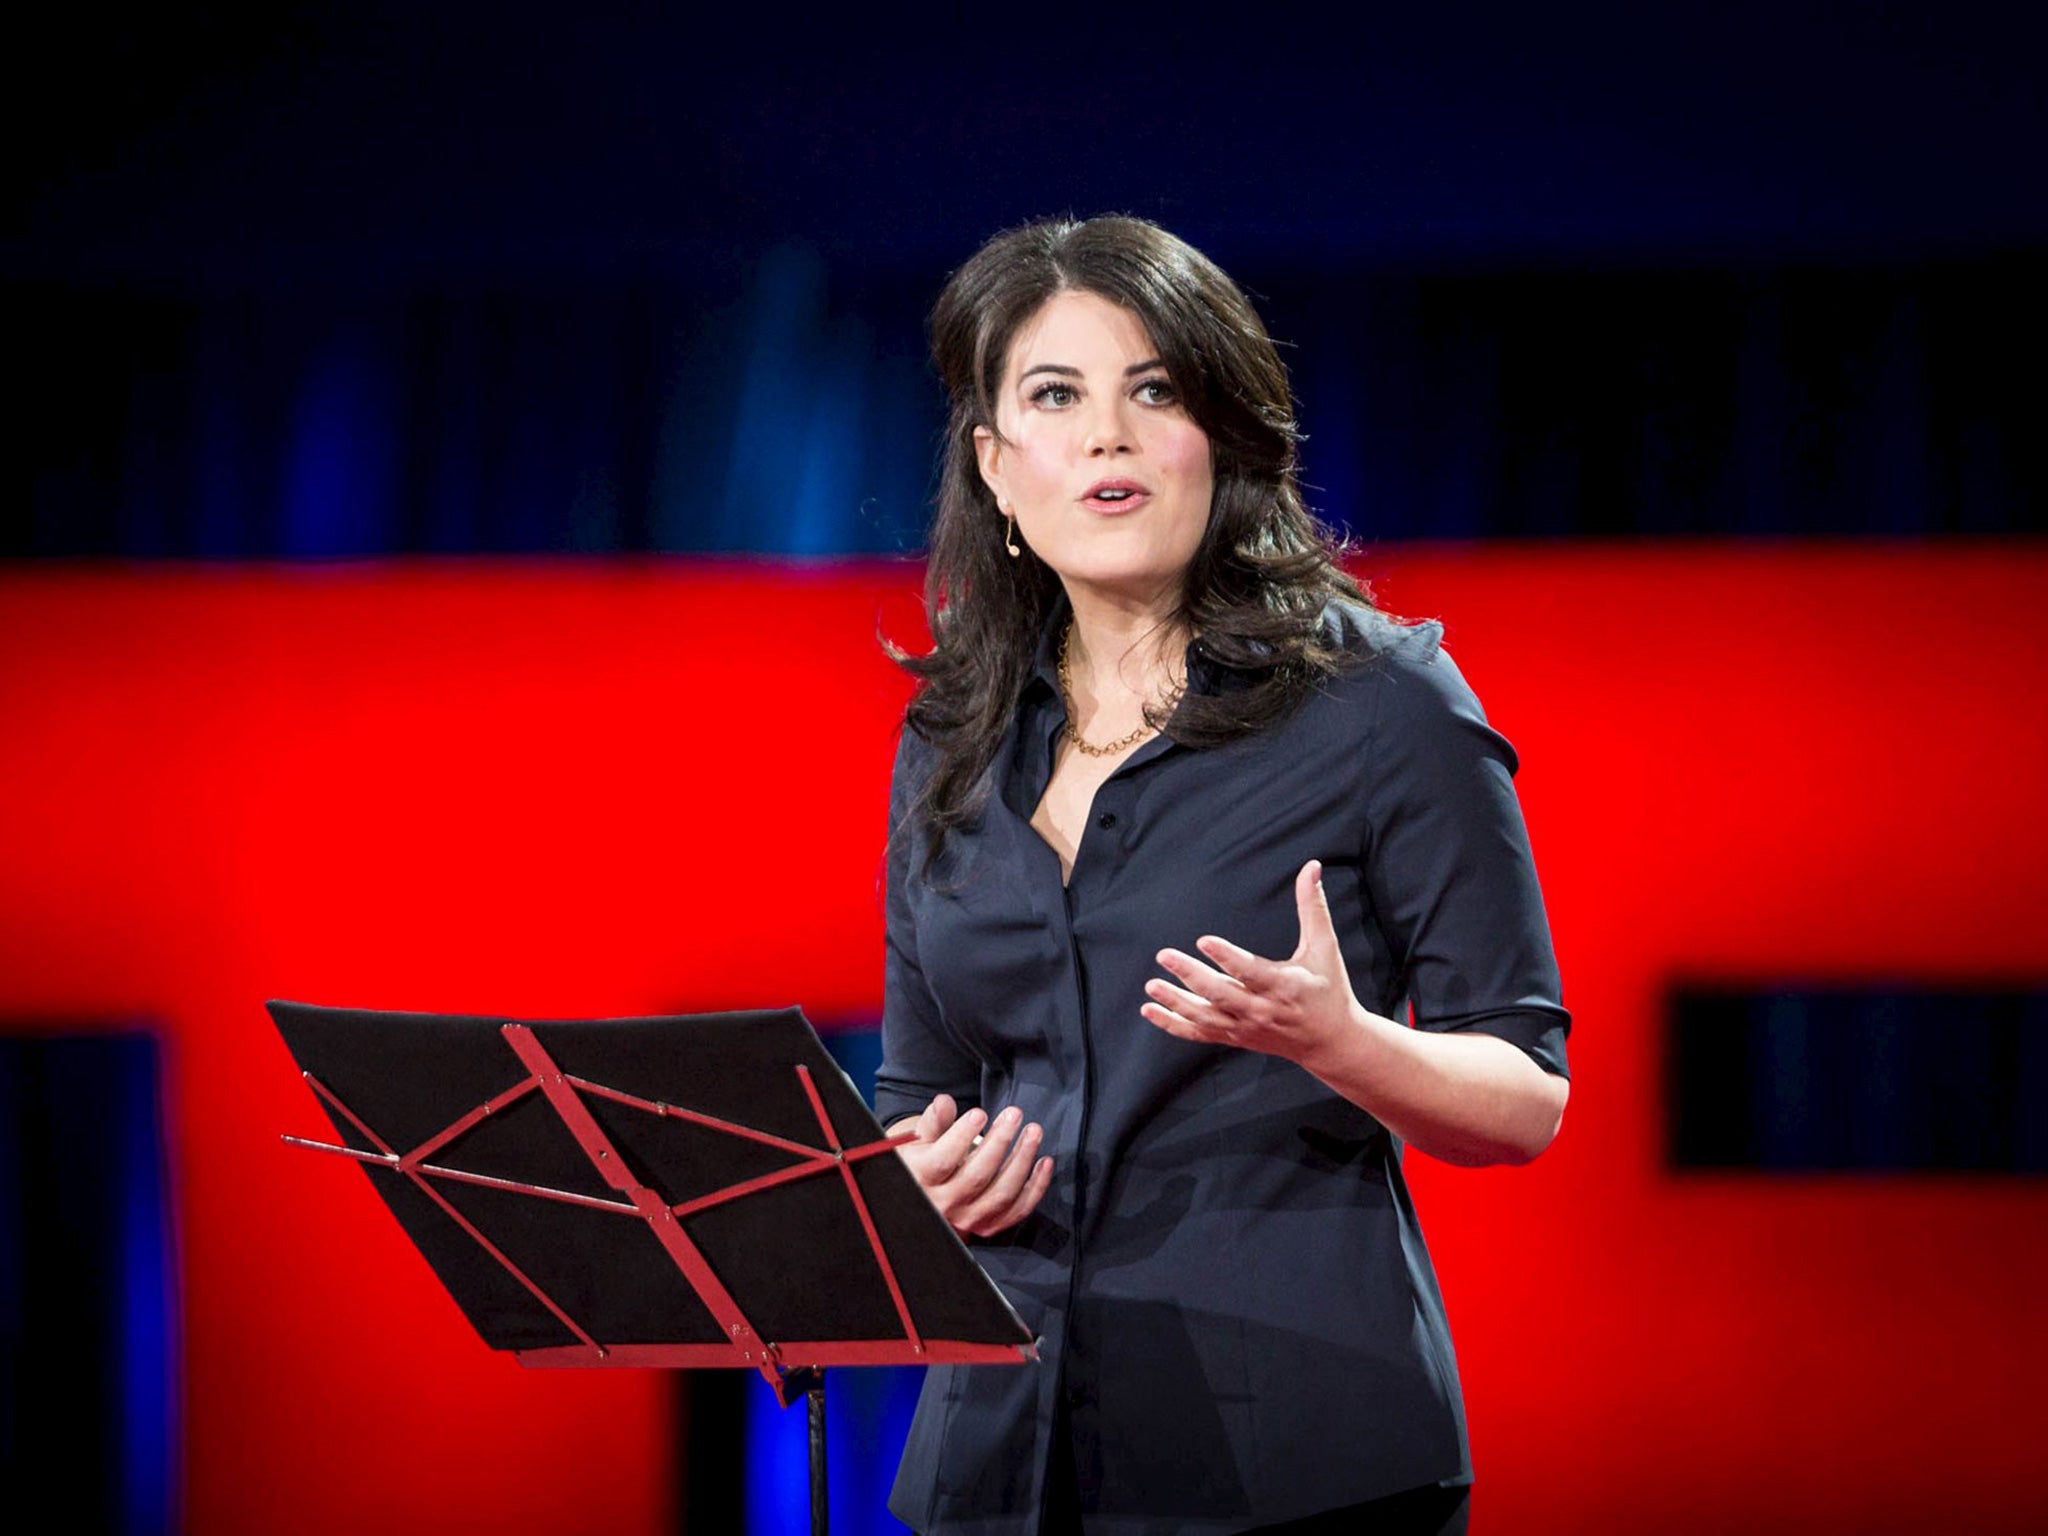 Monica Lewinsky gives her TED talk